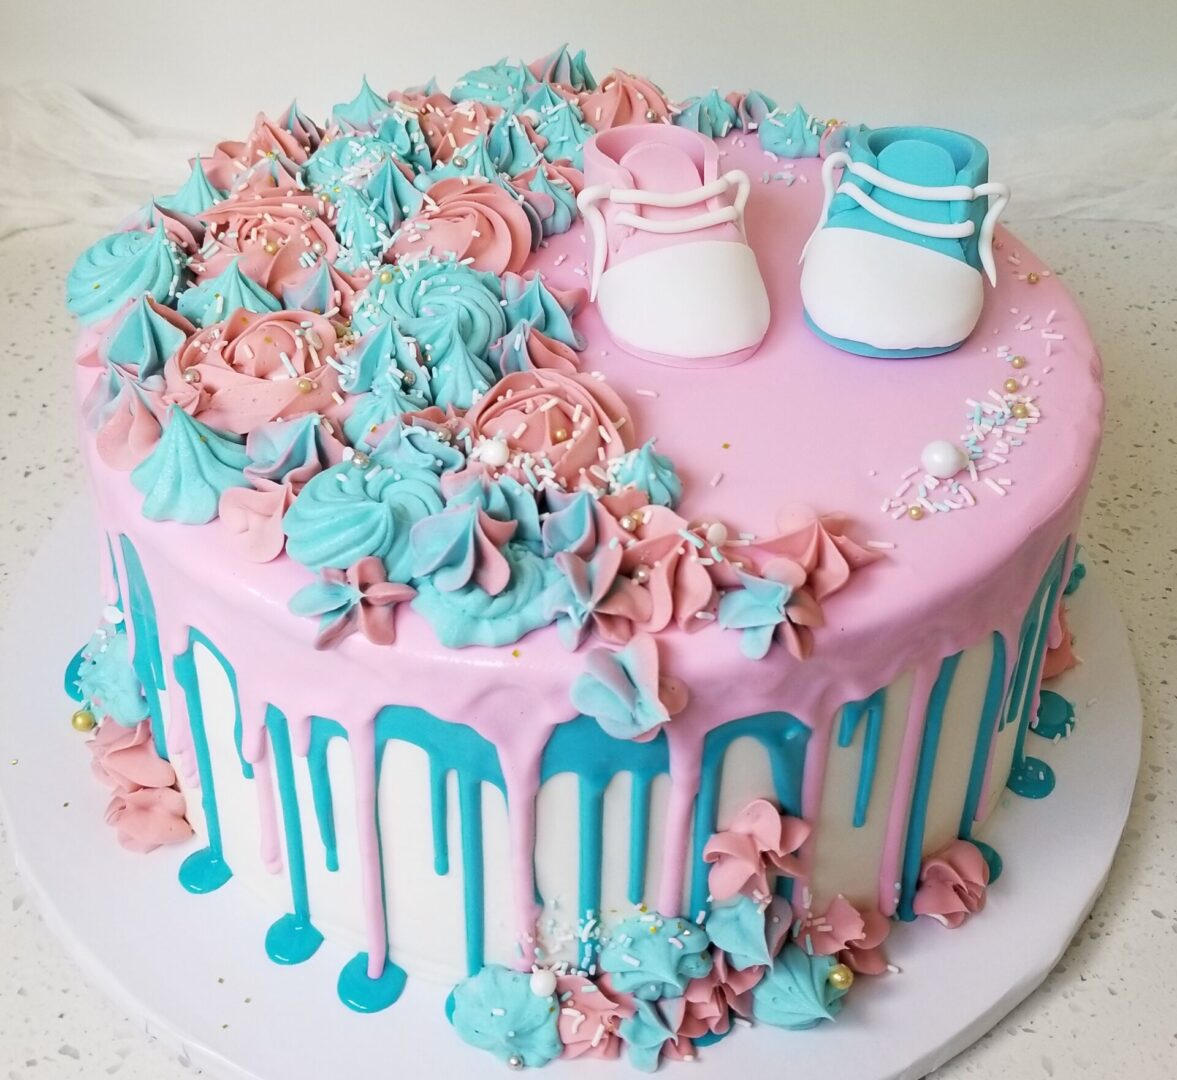 A pink and blue cake with shoes on top